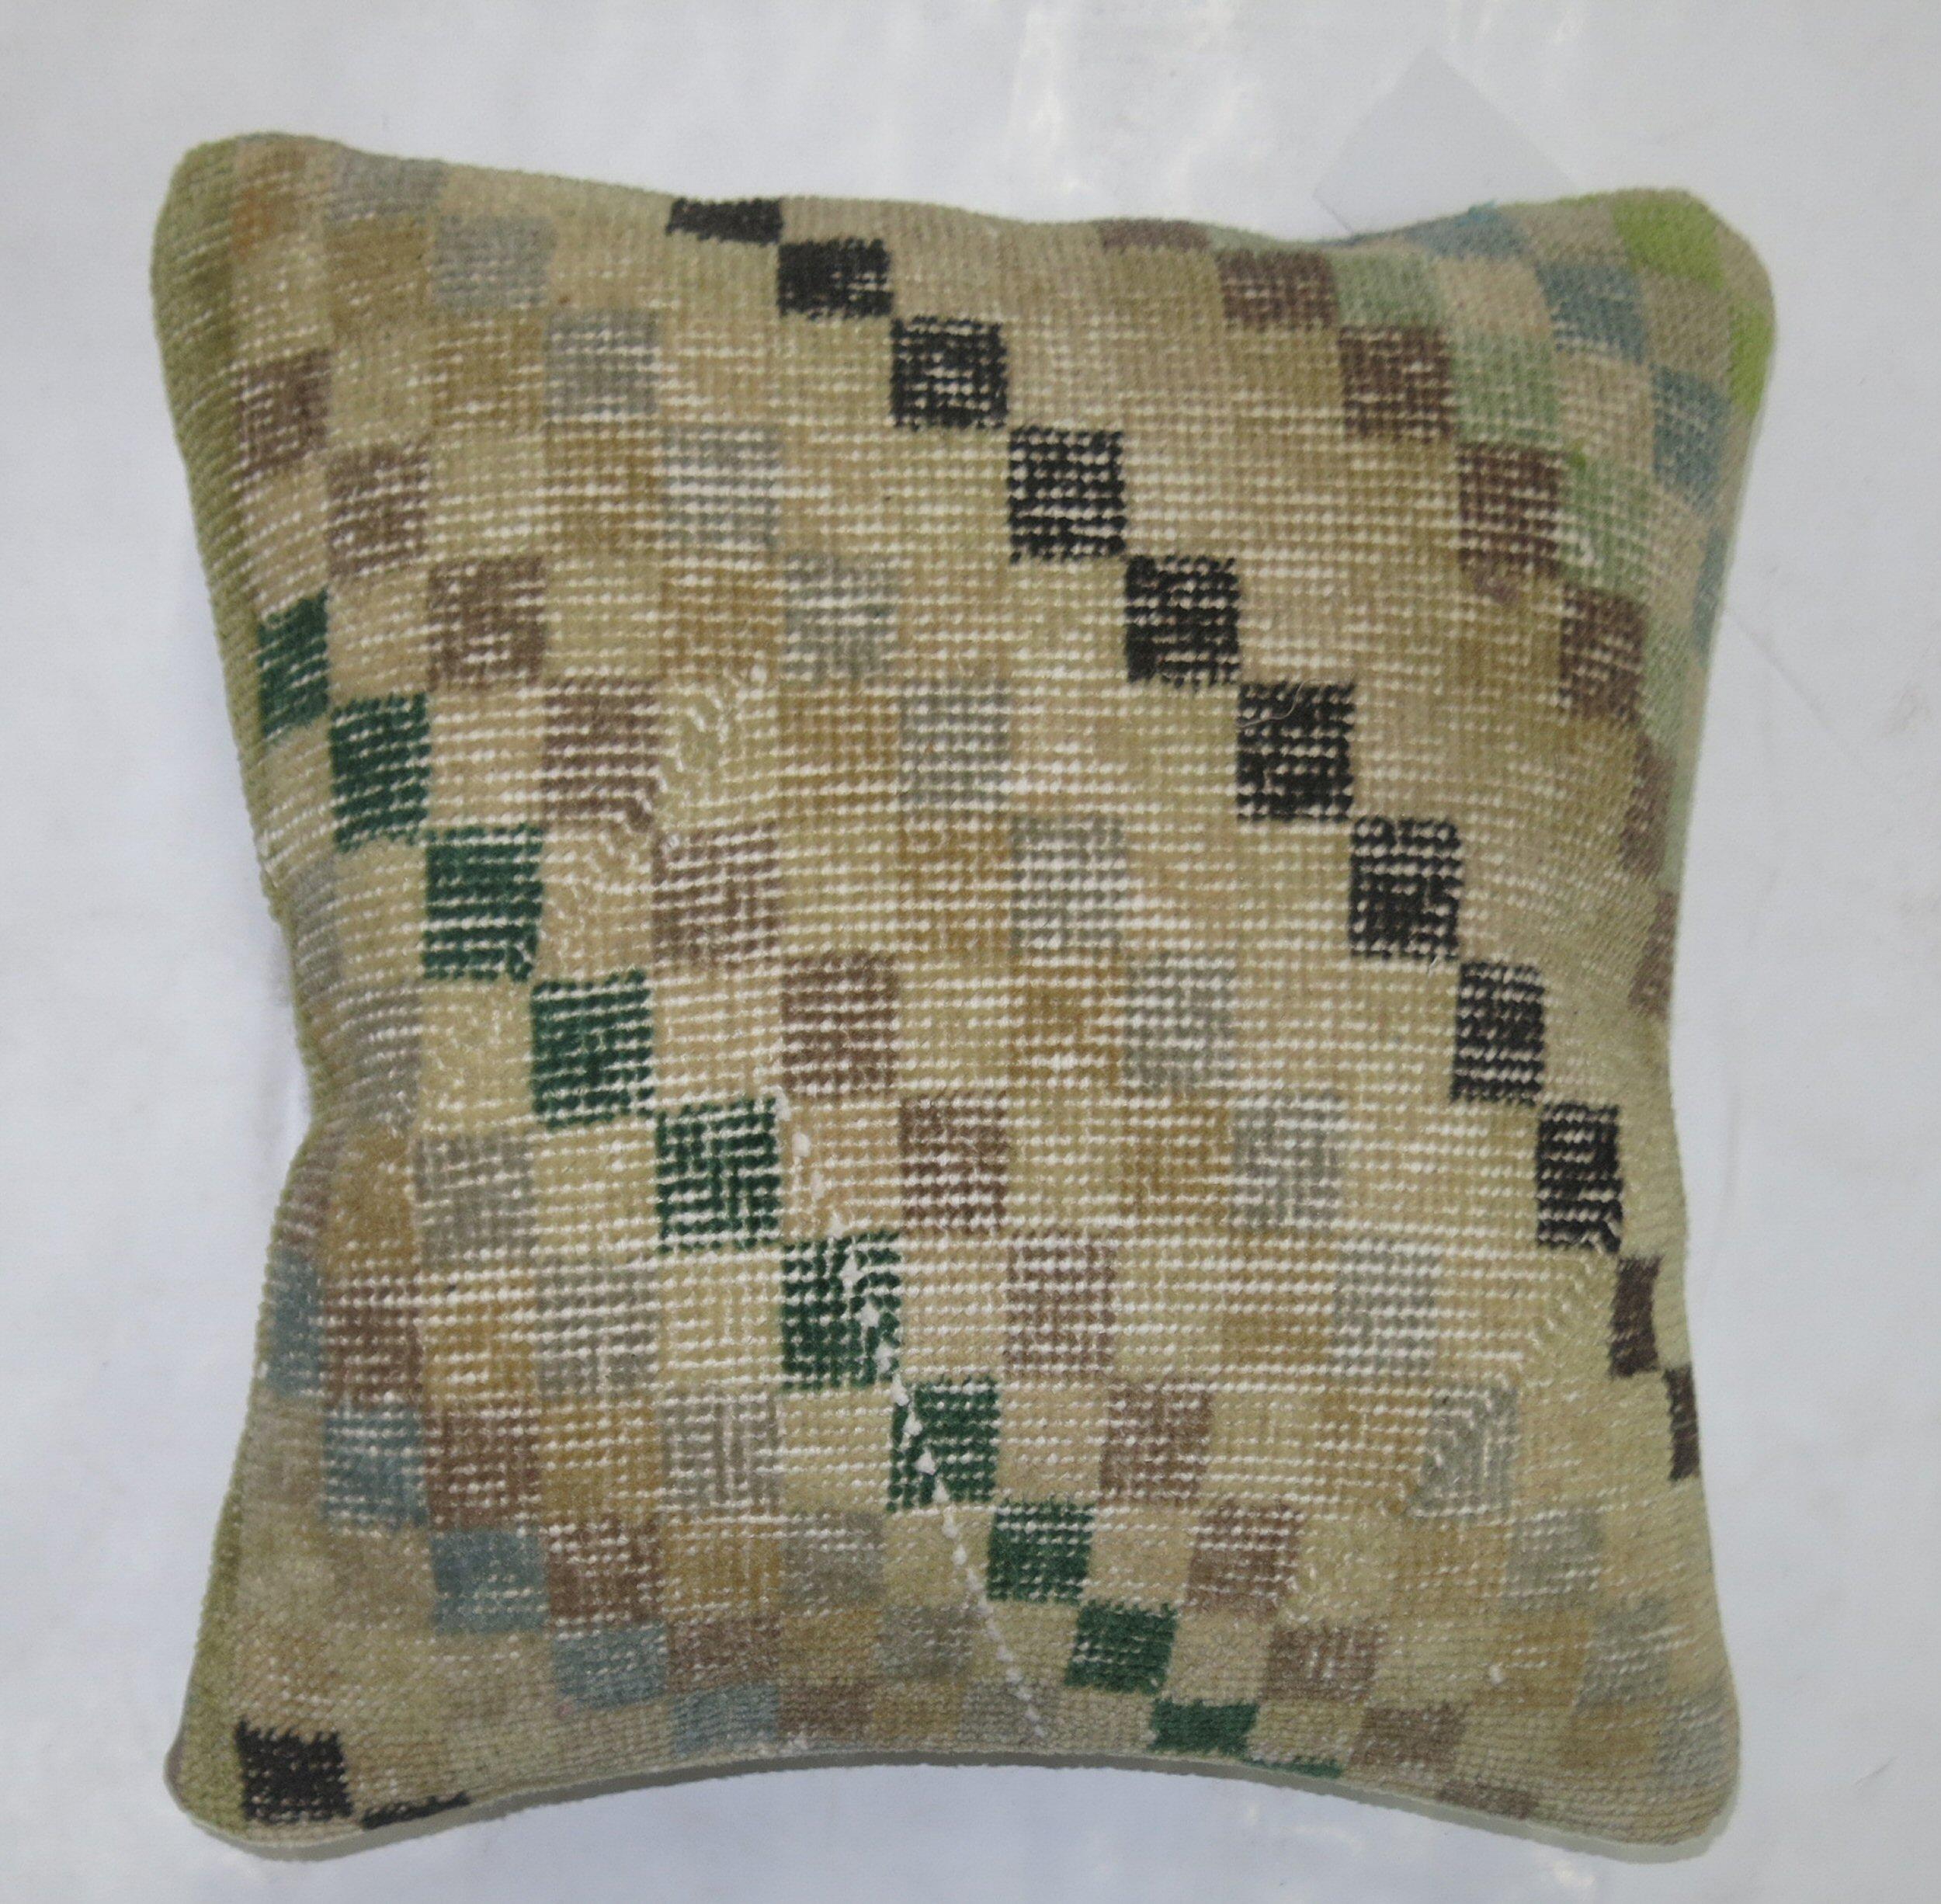 Pillow made from a Turkish Deco rug with a checkerboard motif

Measures: 18'' x 18''.